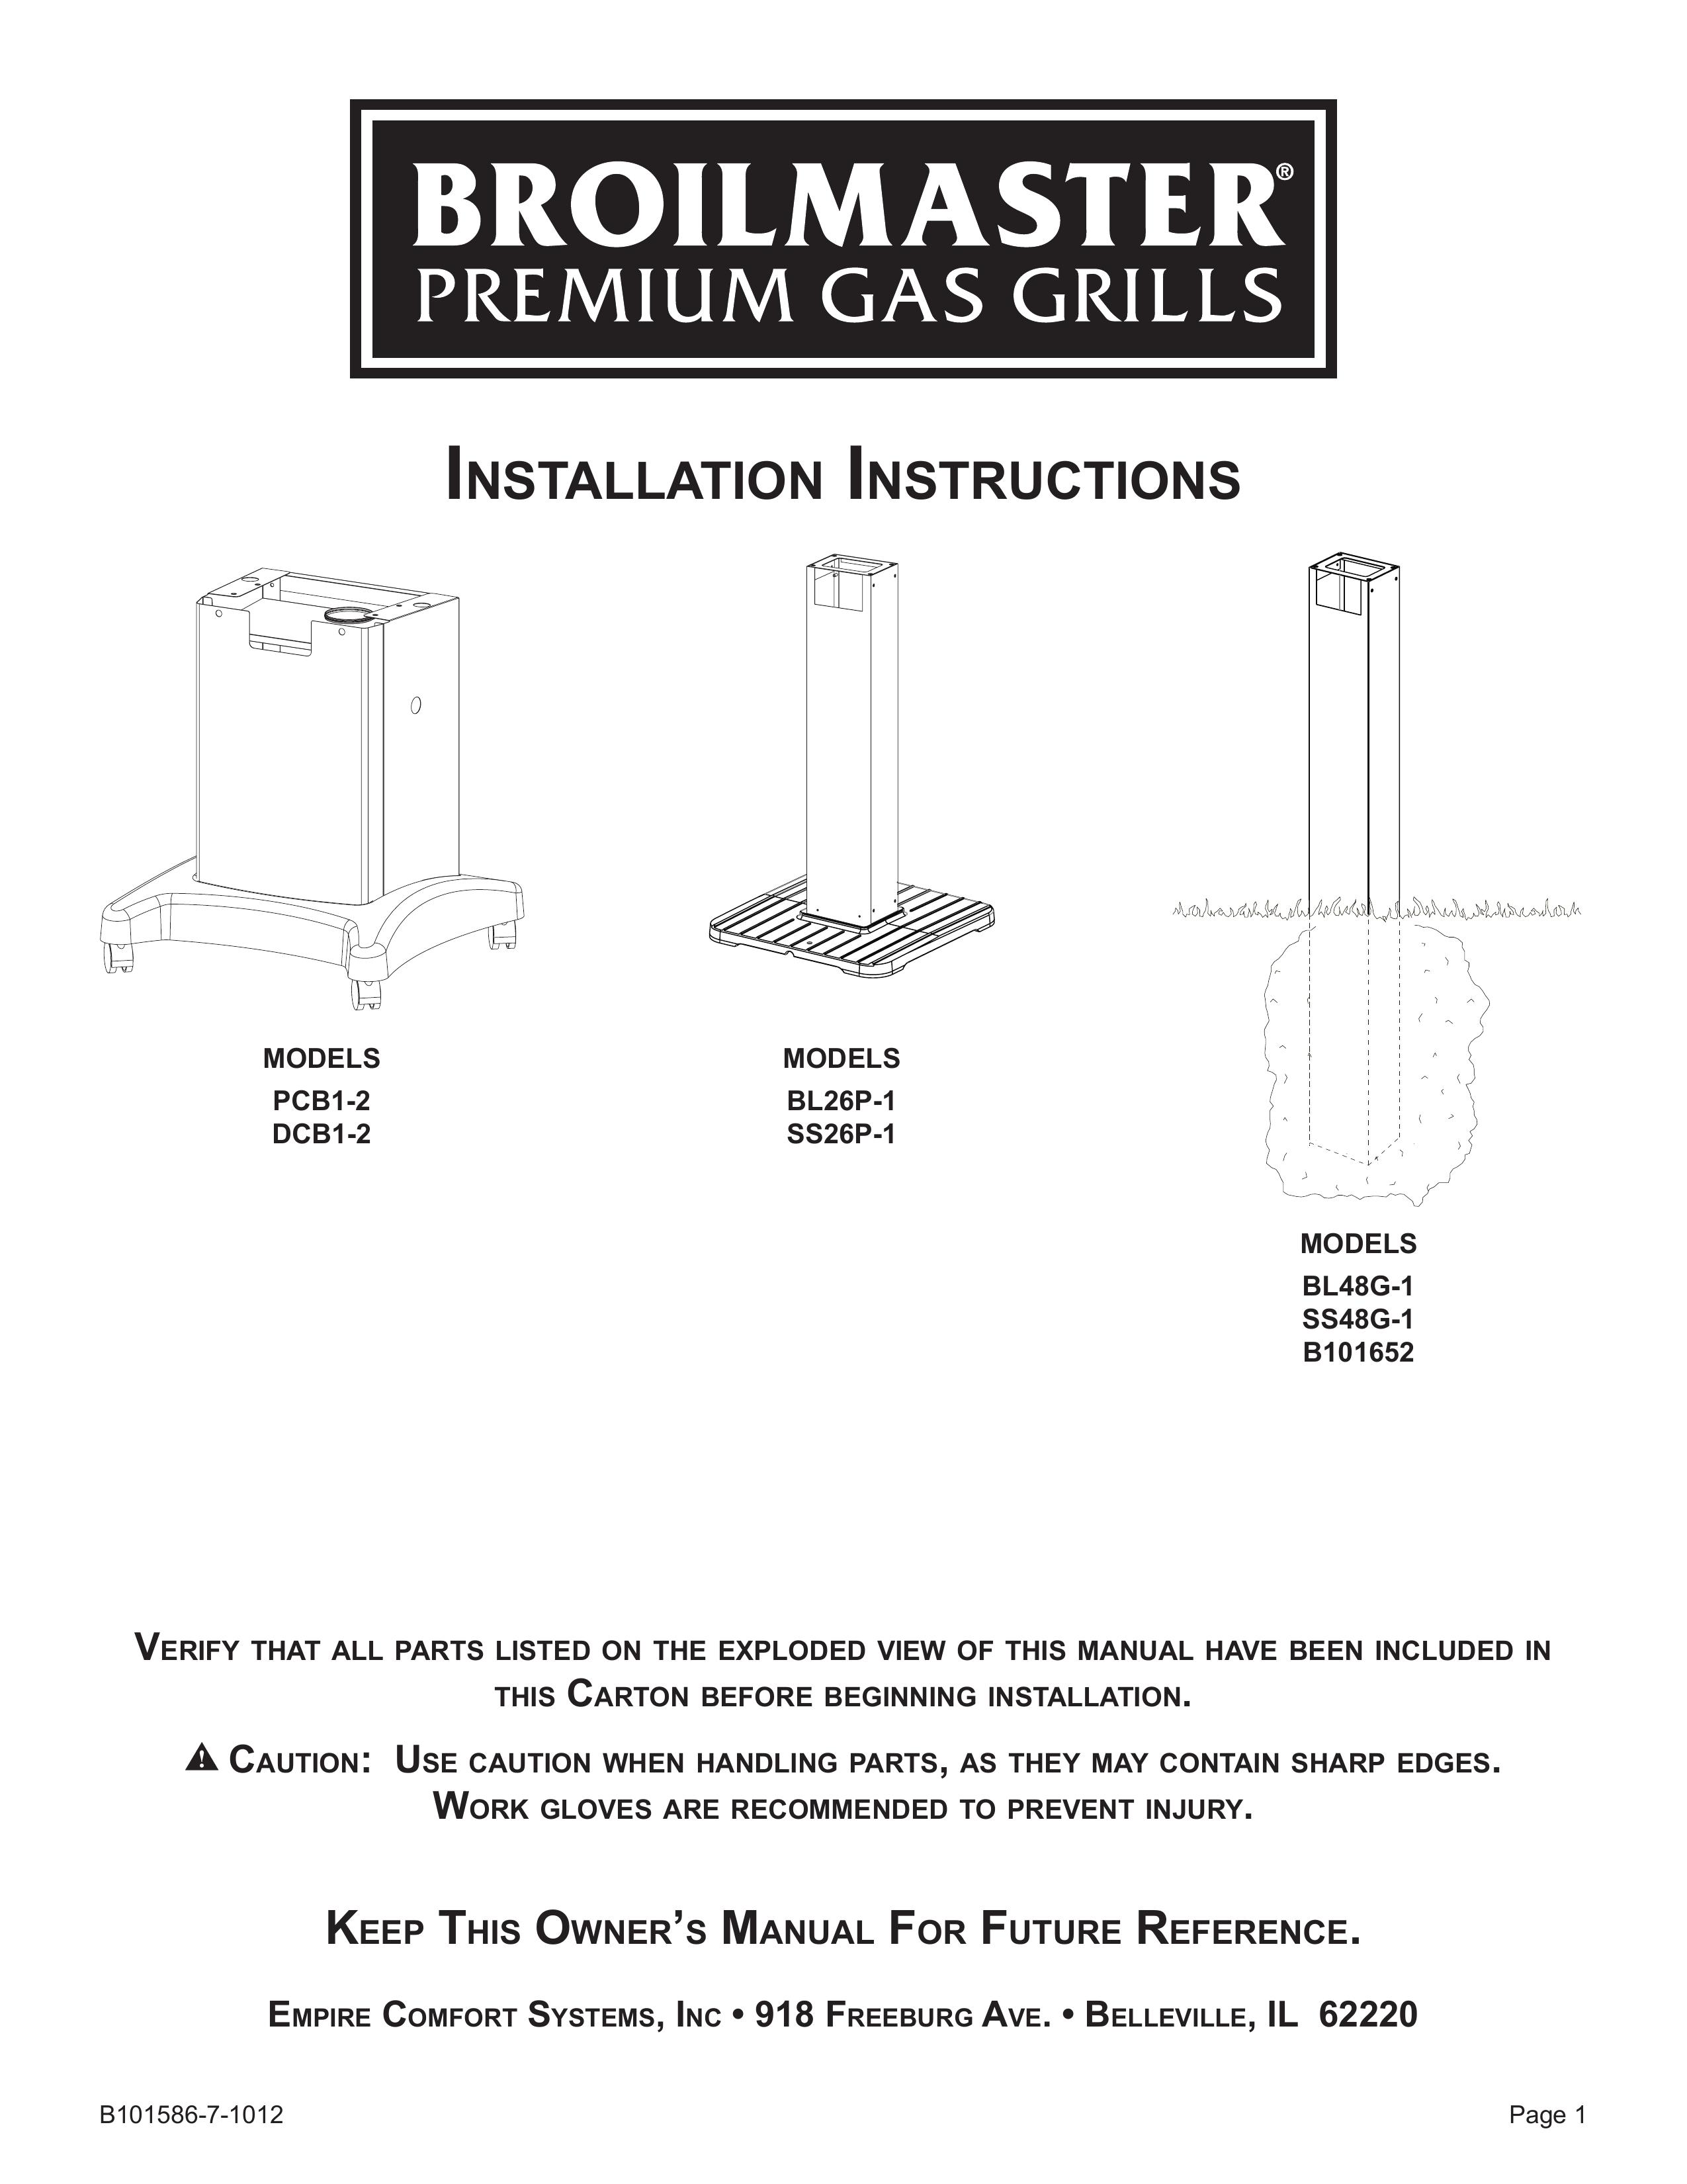 Broilmaster BL26P-1 Gas Grill User Manual